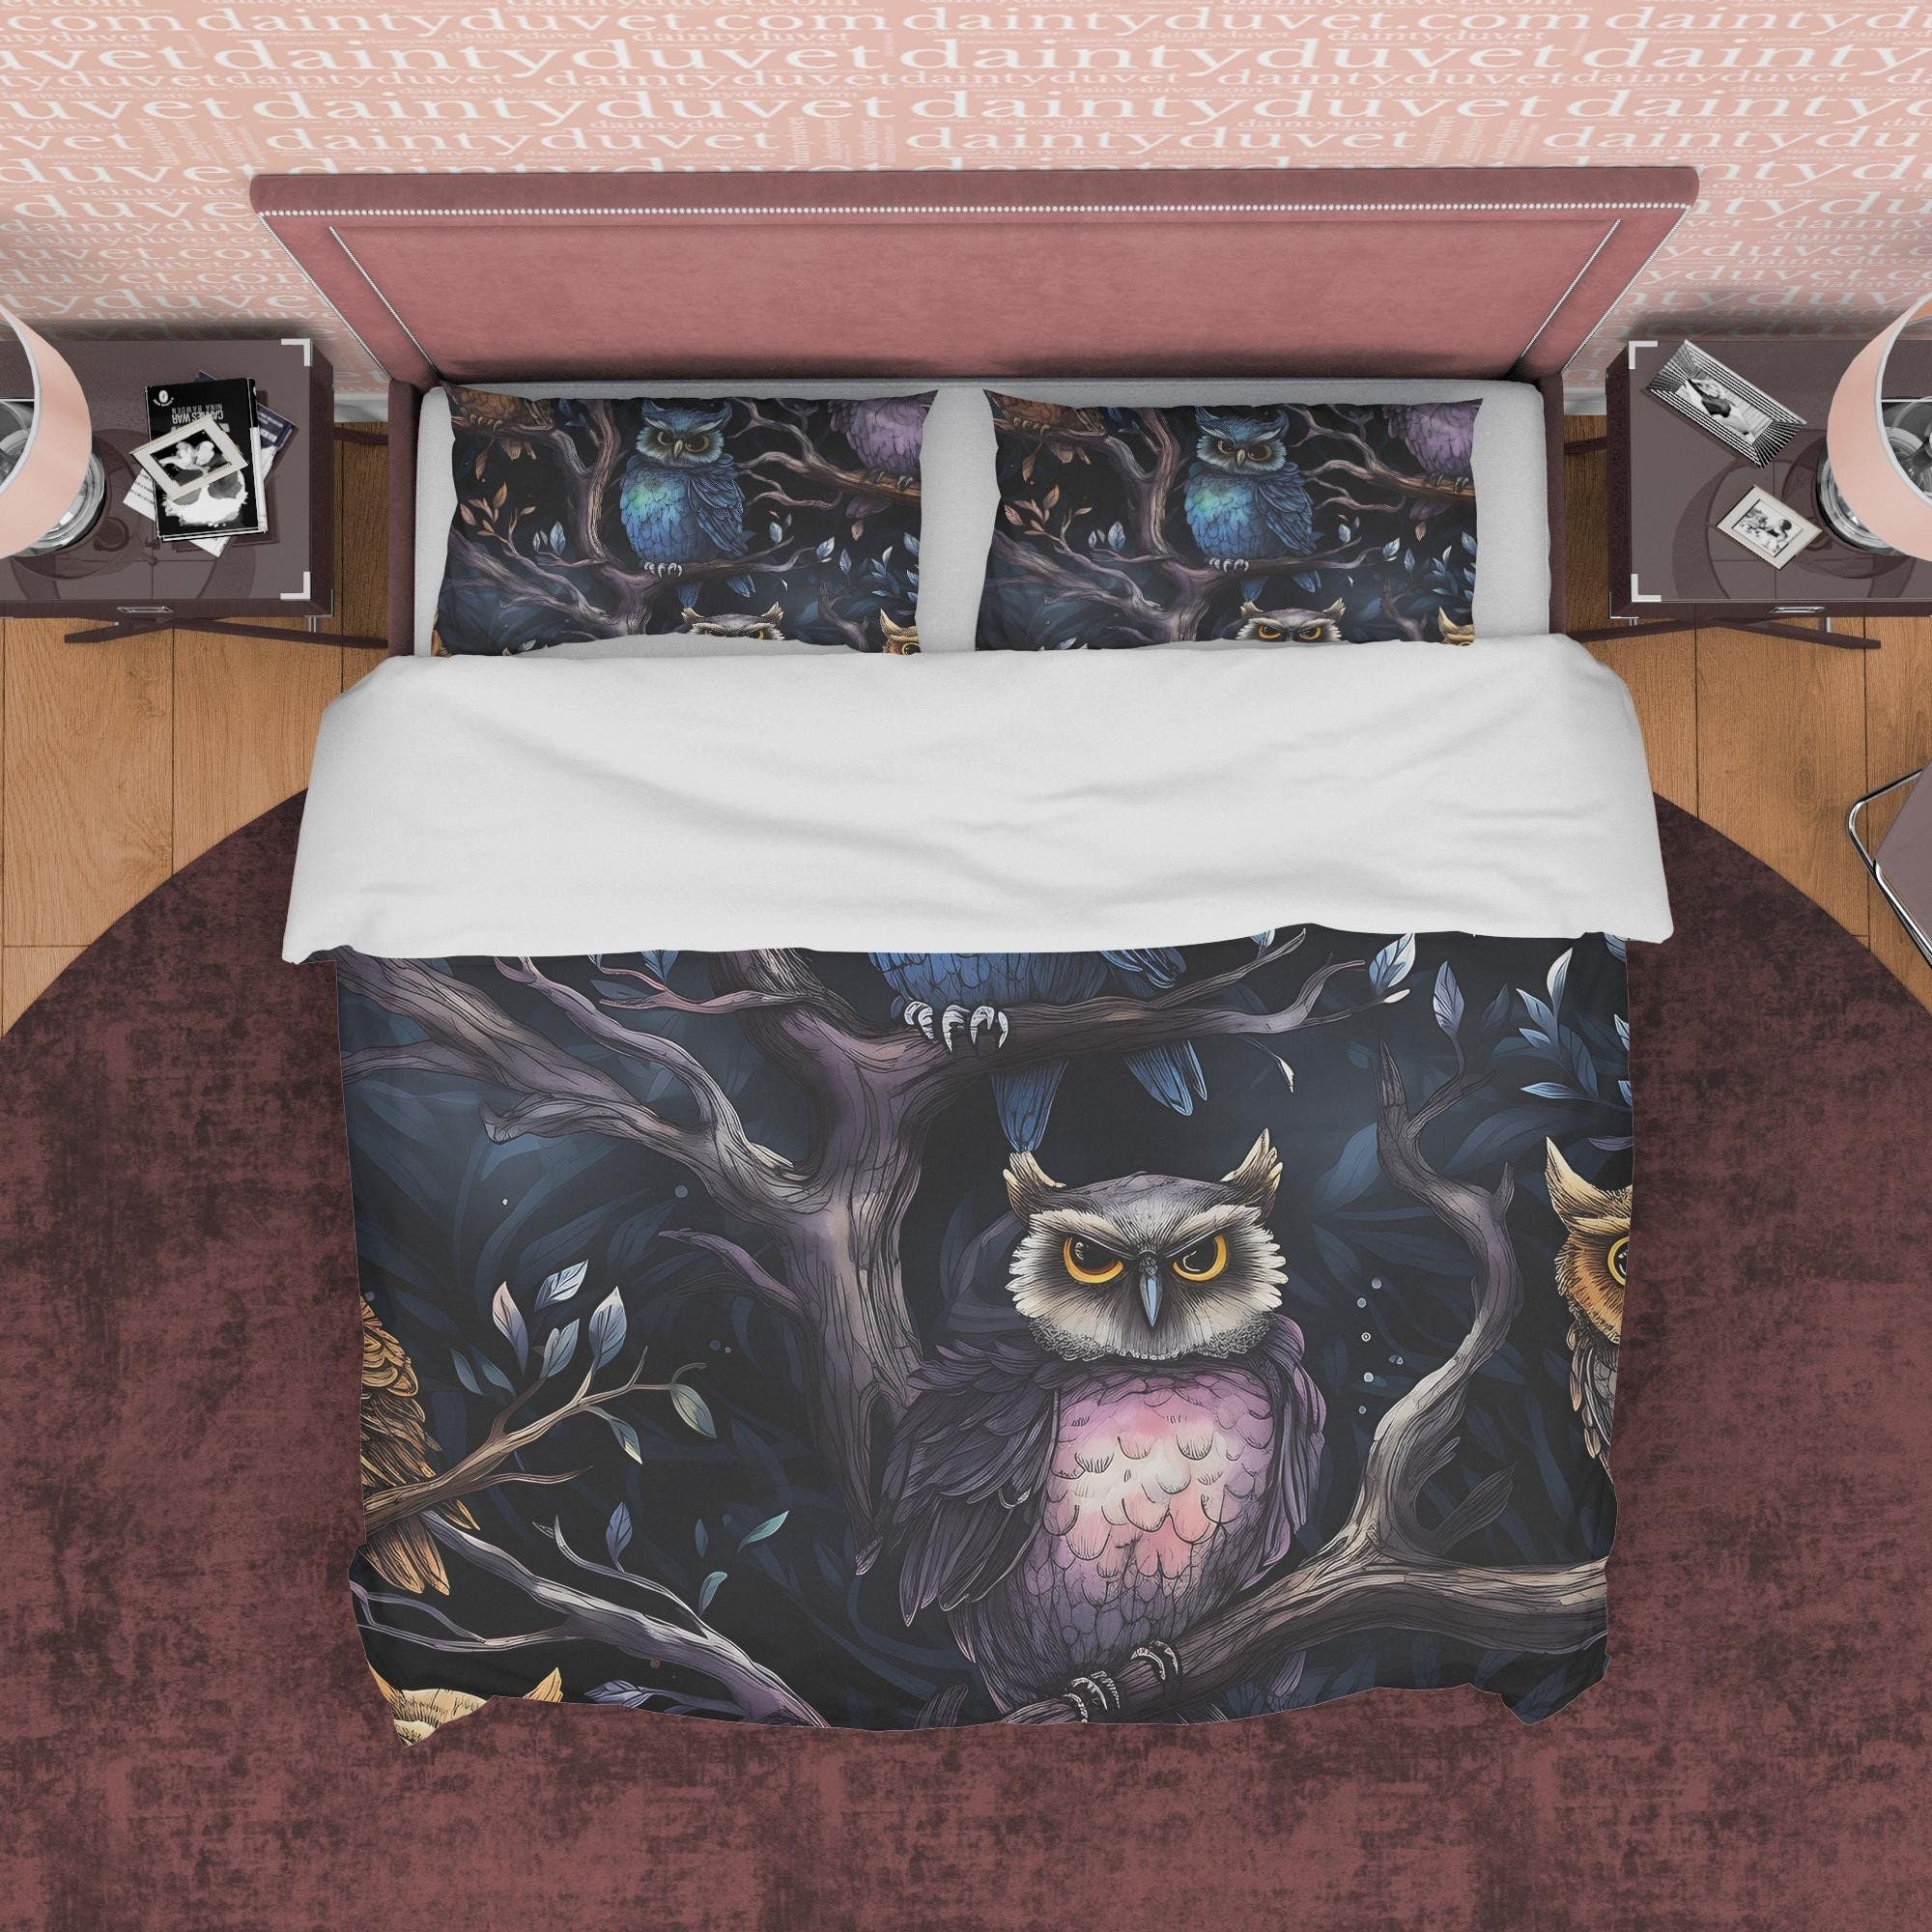 Scary Owl Dark Duvet Cover Set, Spooky Midnight Themed Quilt Cover Aesthetic Zipper Bedding, Halloween Room Decor, Haunted Forest Bedding